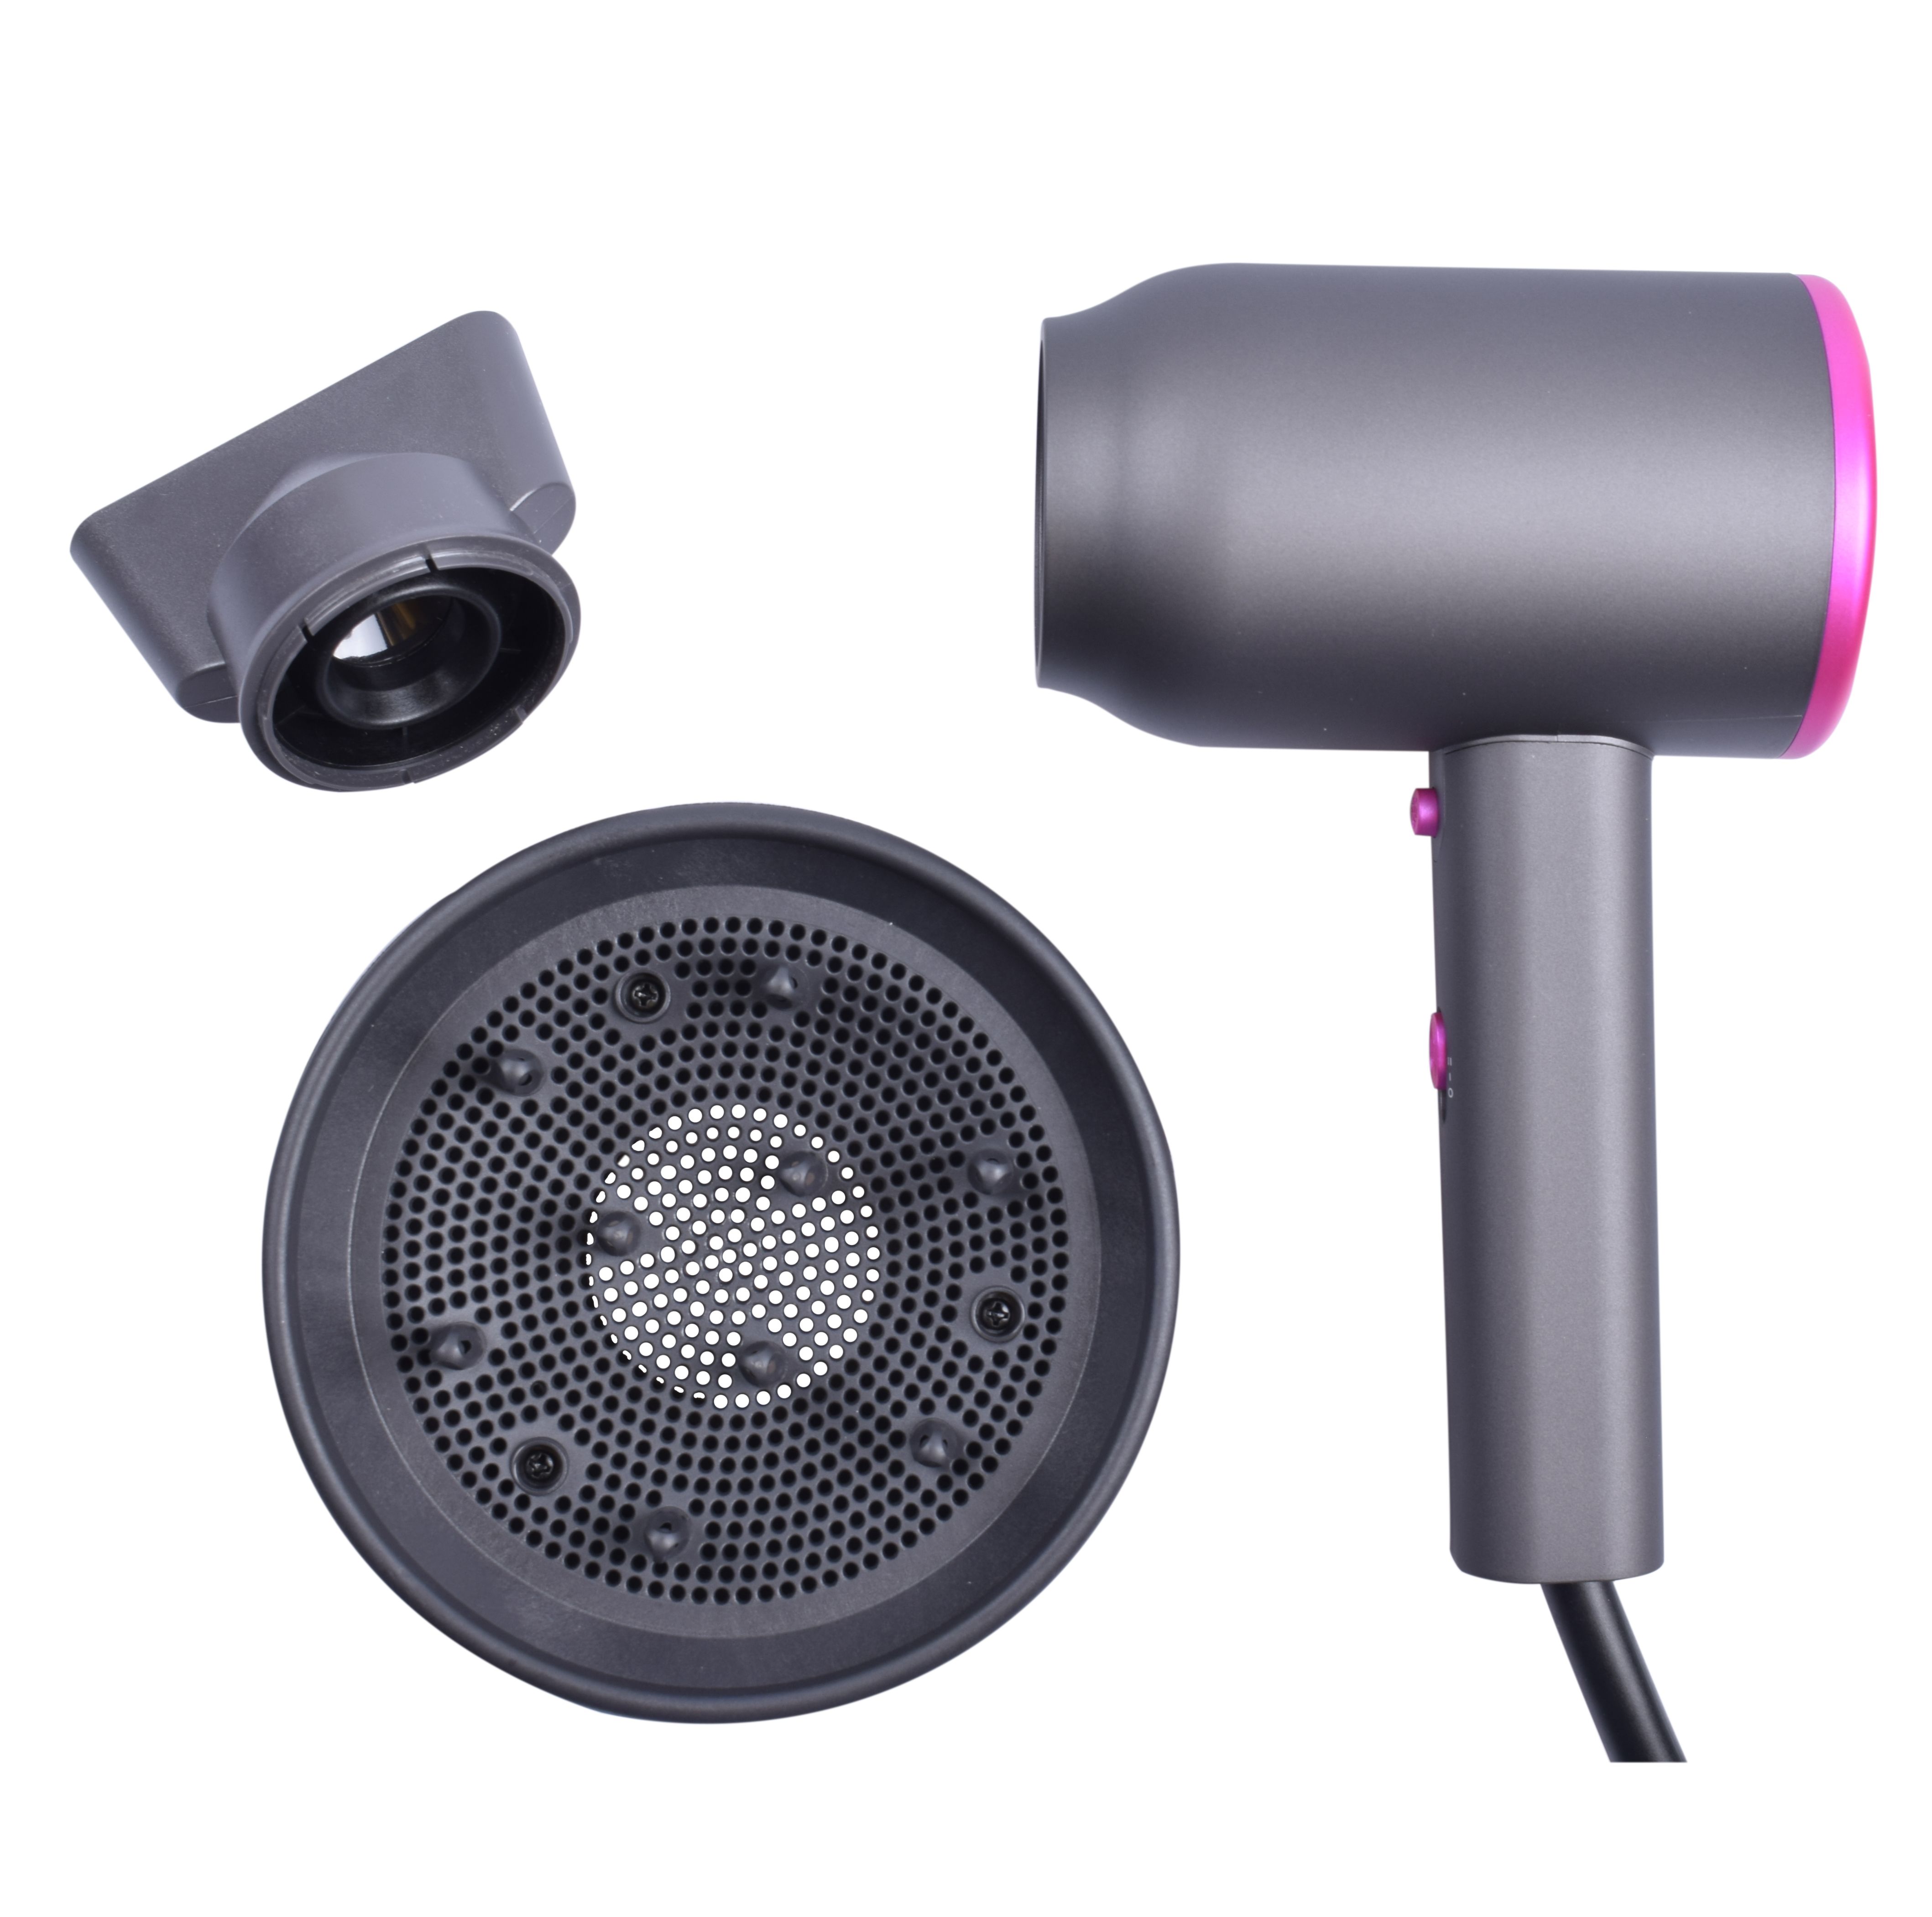 Hair Dryer Quick Drying hot air strong Wind blow dryer negative lonic hammer with low noise